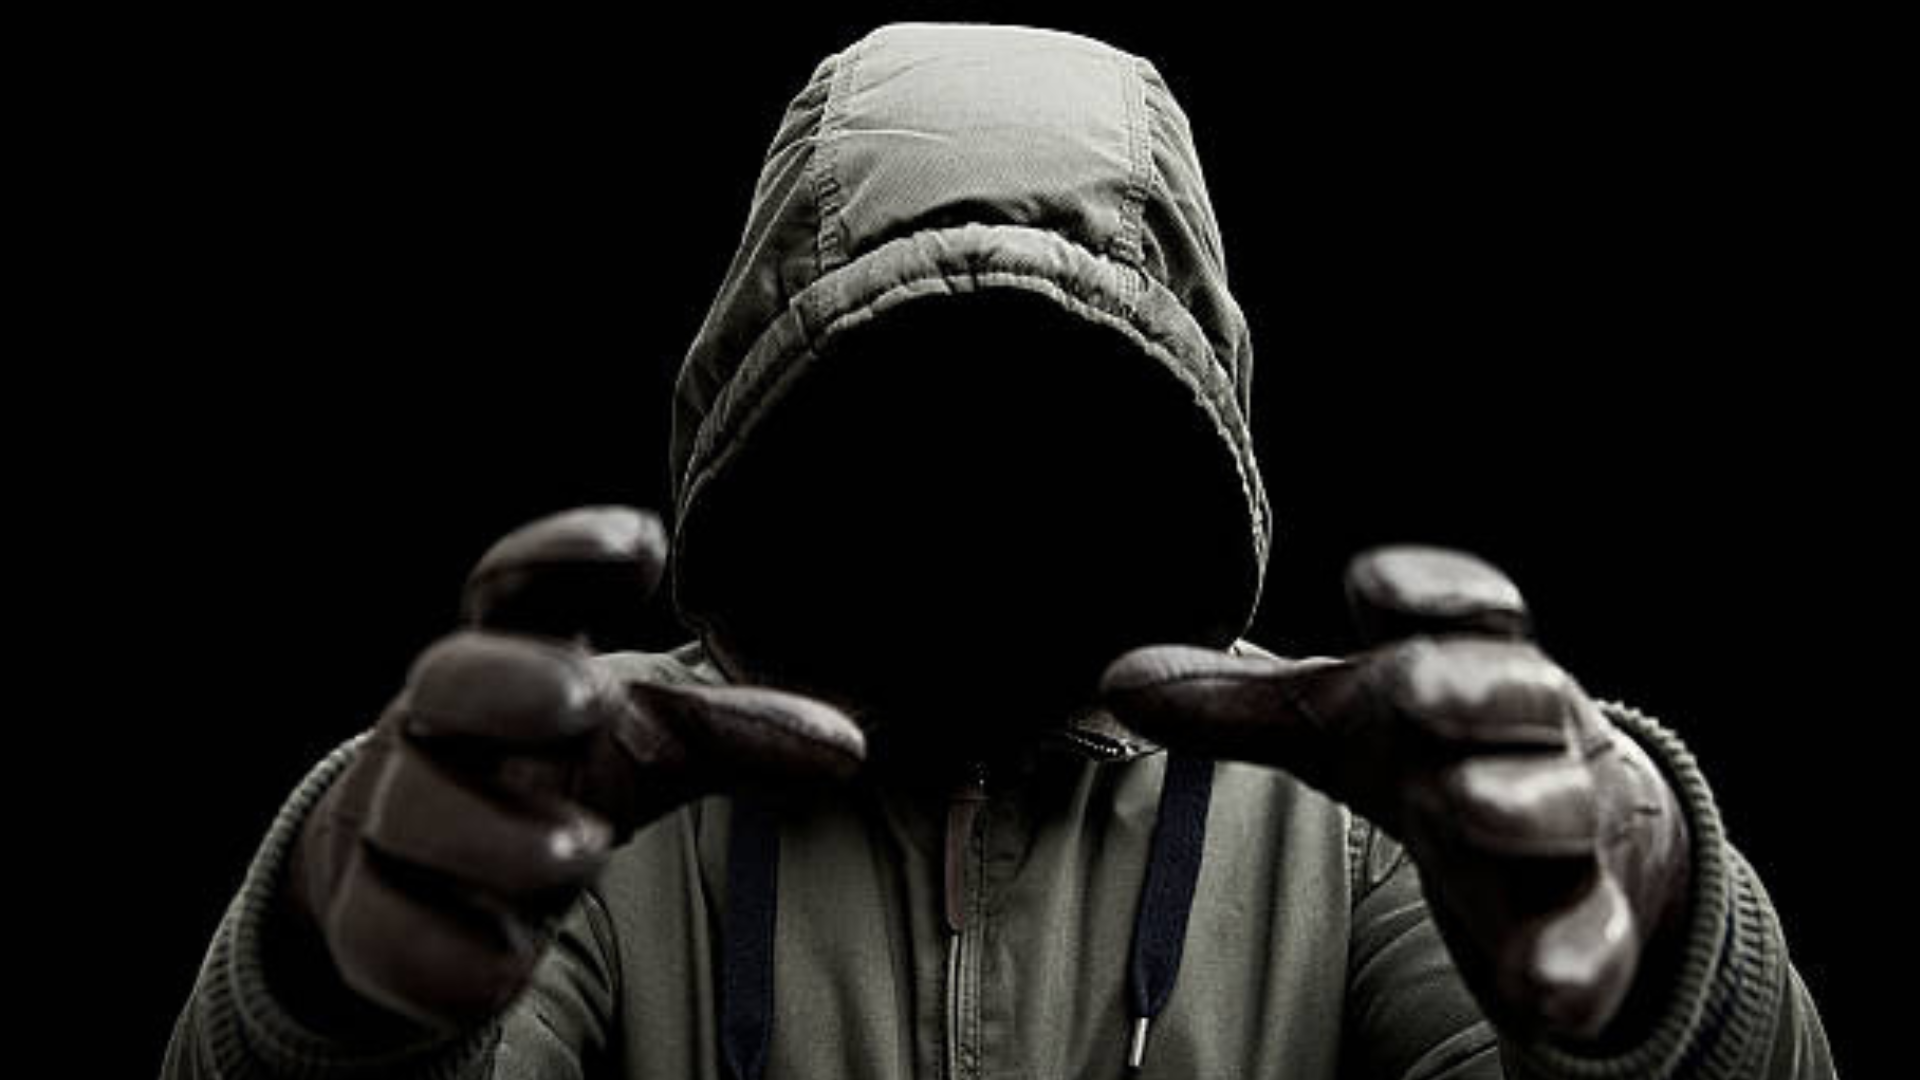 A man wearing a hoodie with no face and about to strangle someone